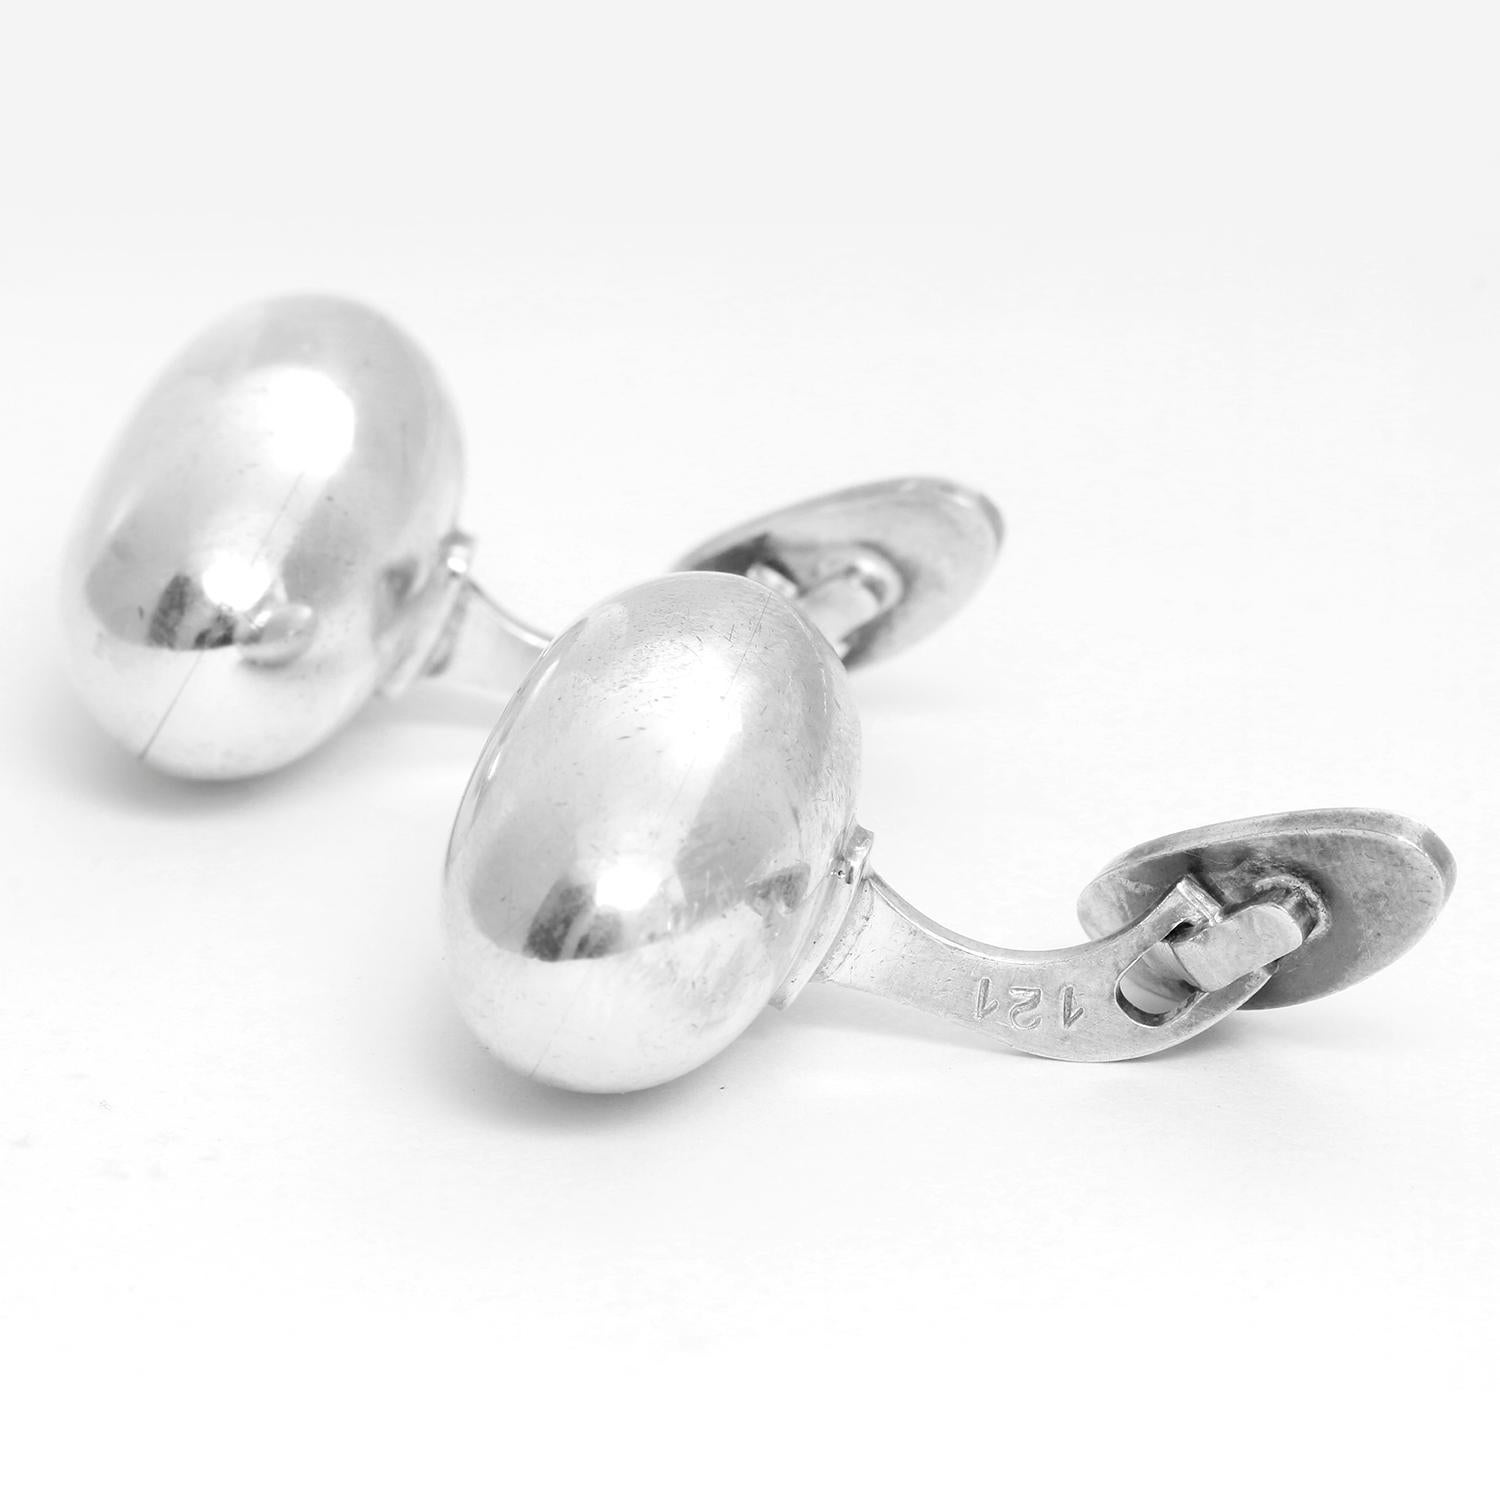 Genuine Signed Georg Jensen Classic Polished Silver 925 Cufflinks - These cufflinks are stamped George Jensen 925 S Denmark and numbered 121. They measure 30mm x 16mm. Total weight is 21.1 grams.